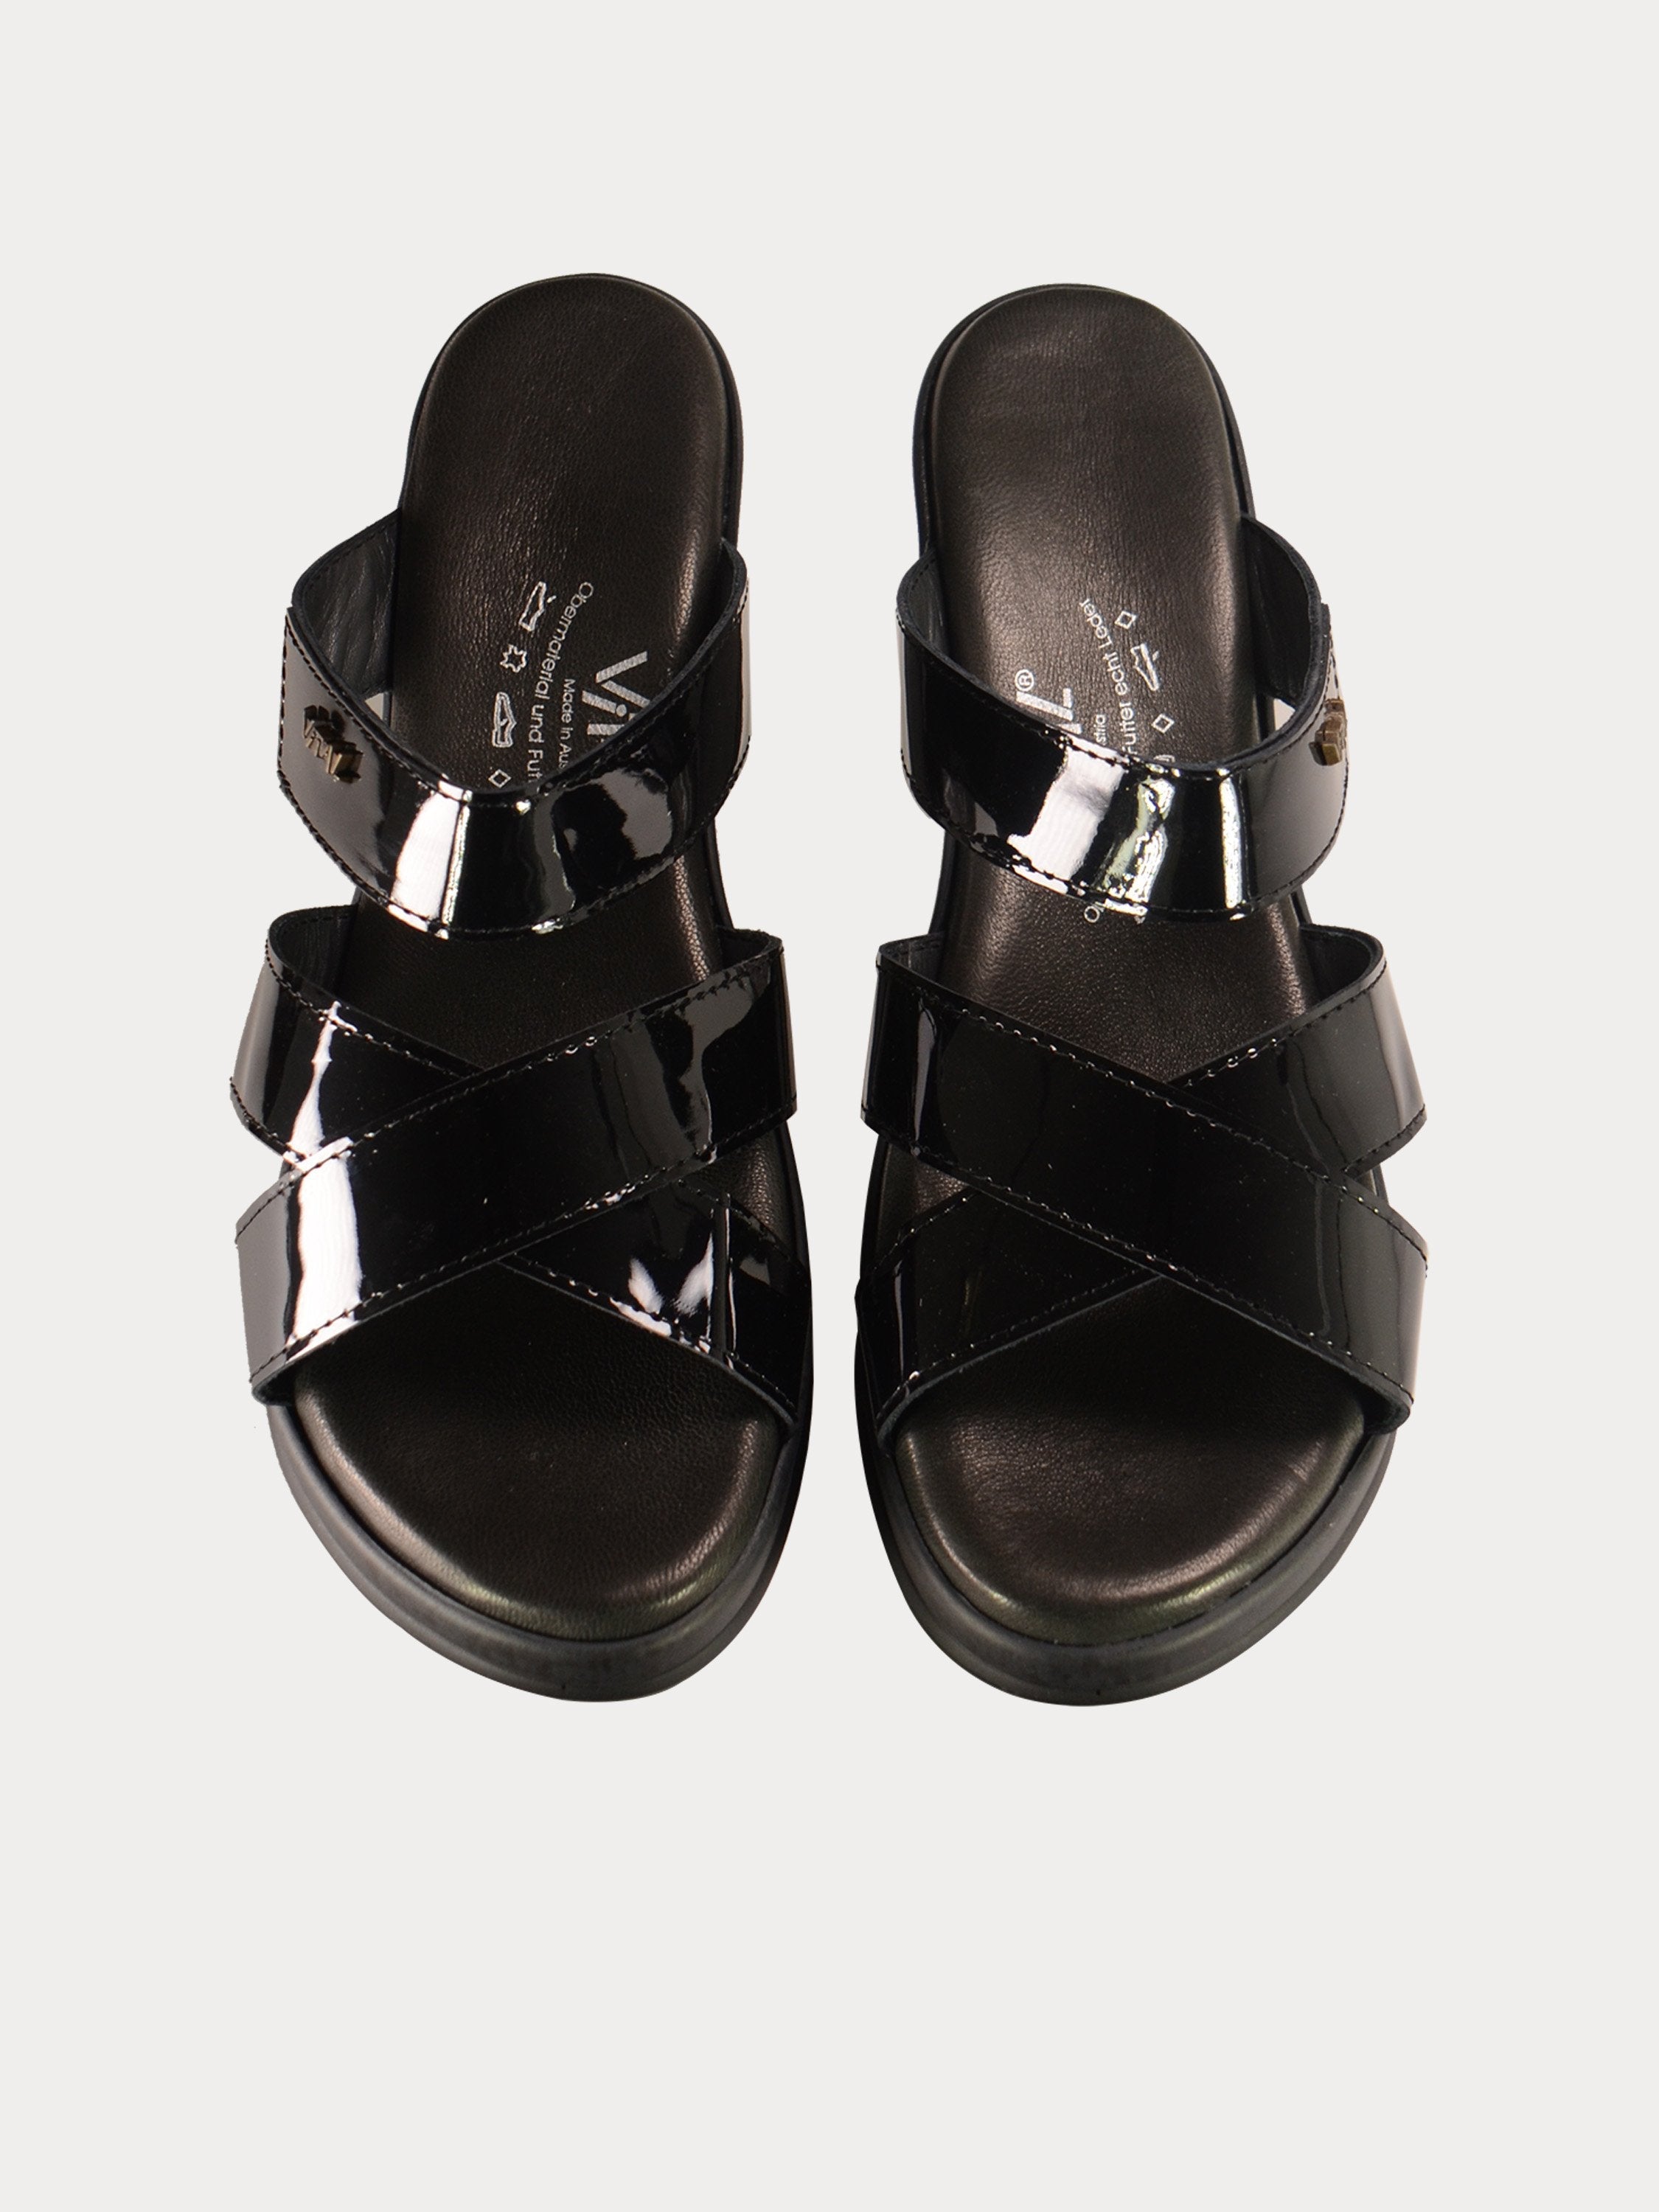 Vital Thin Strap Wedge Leather Sandals #color_Black